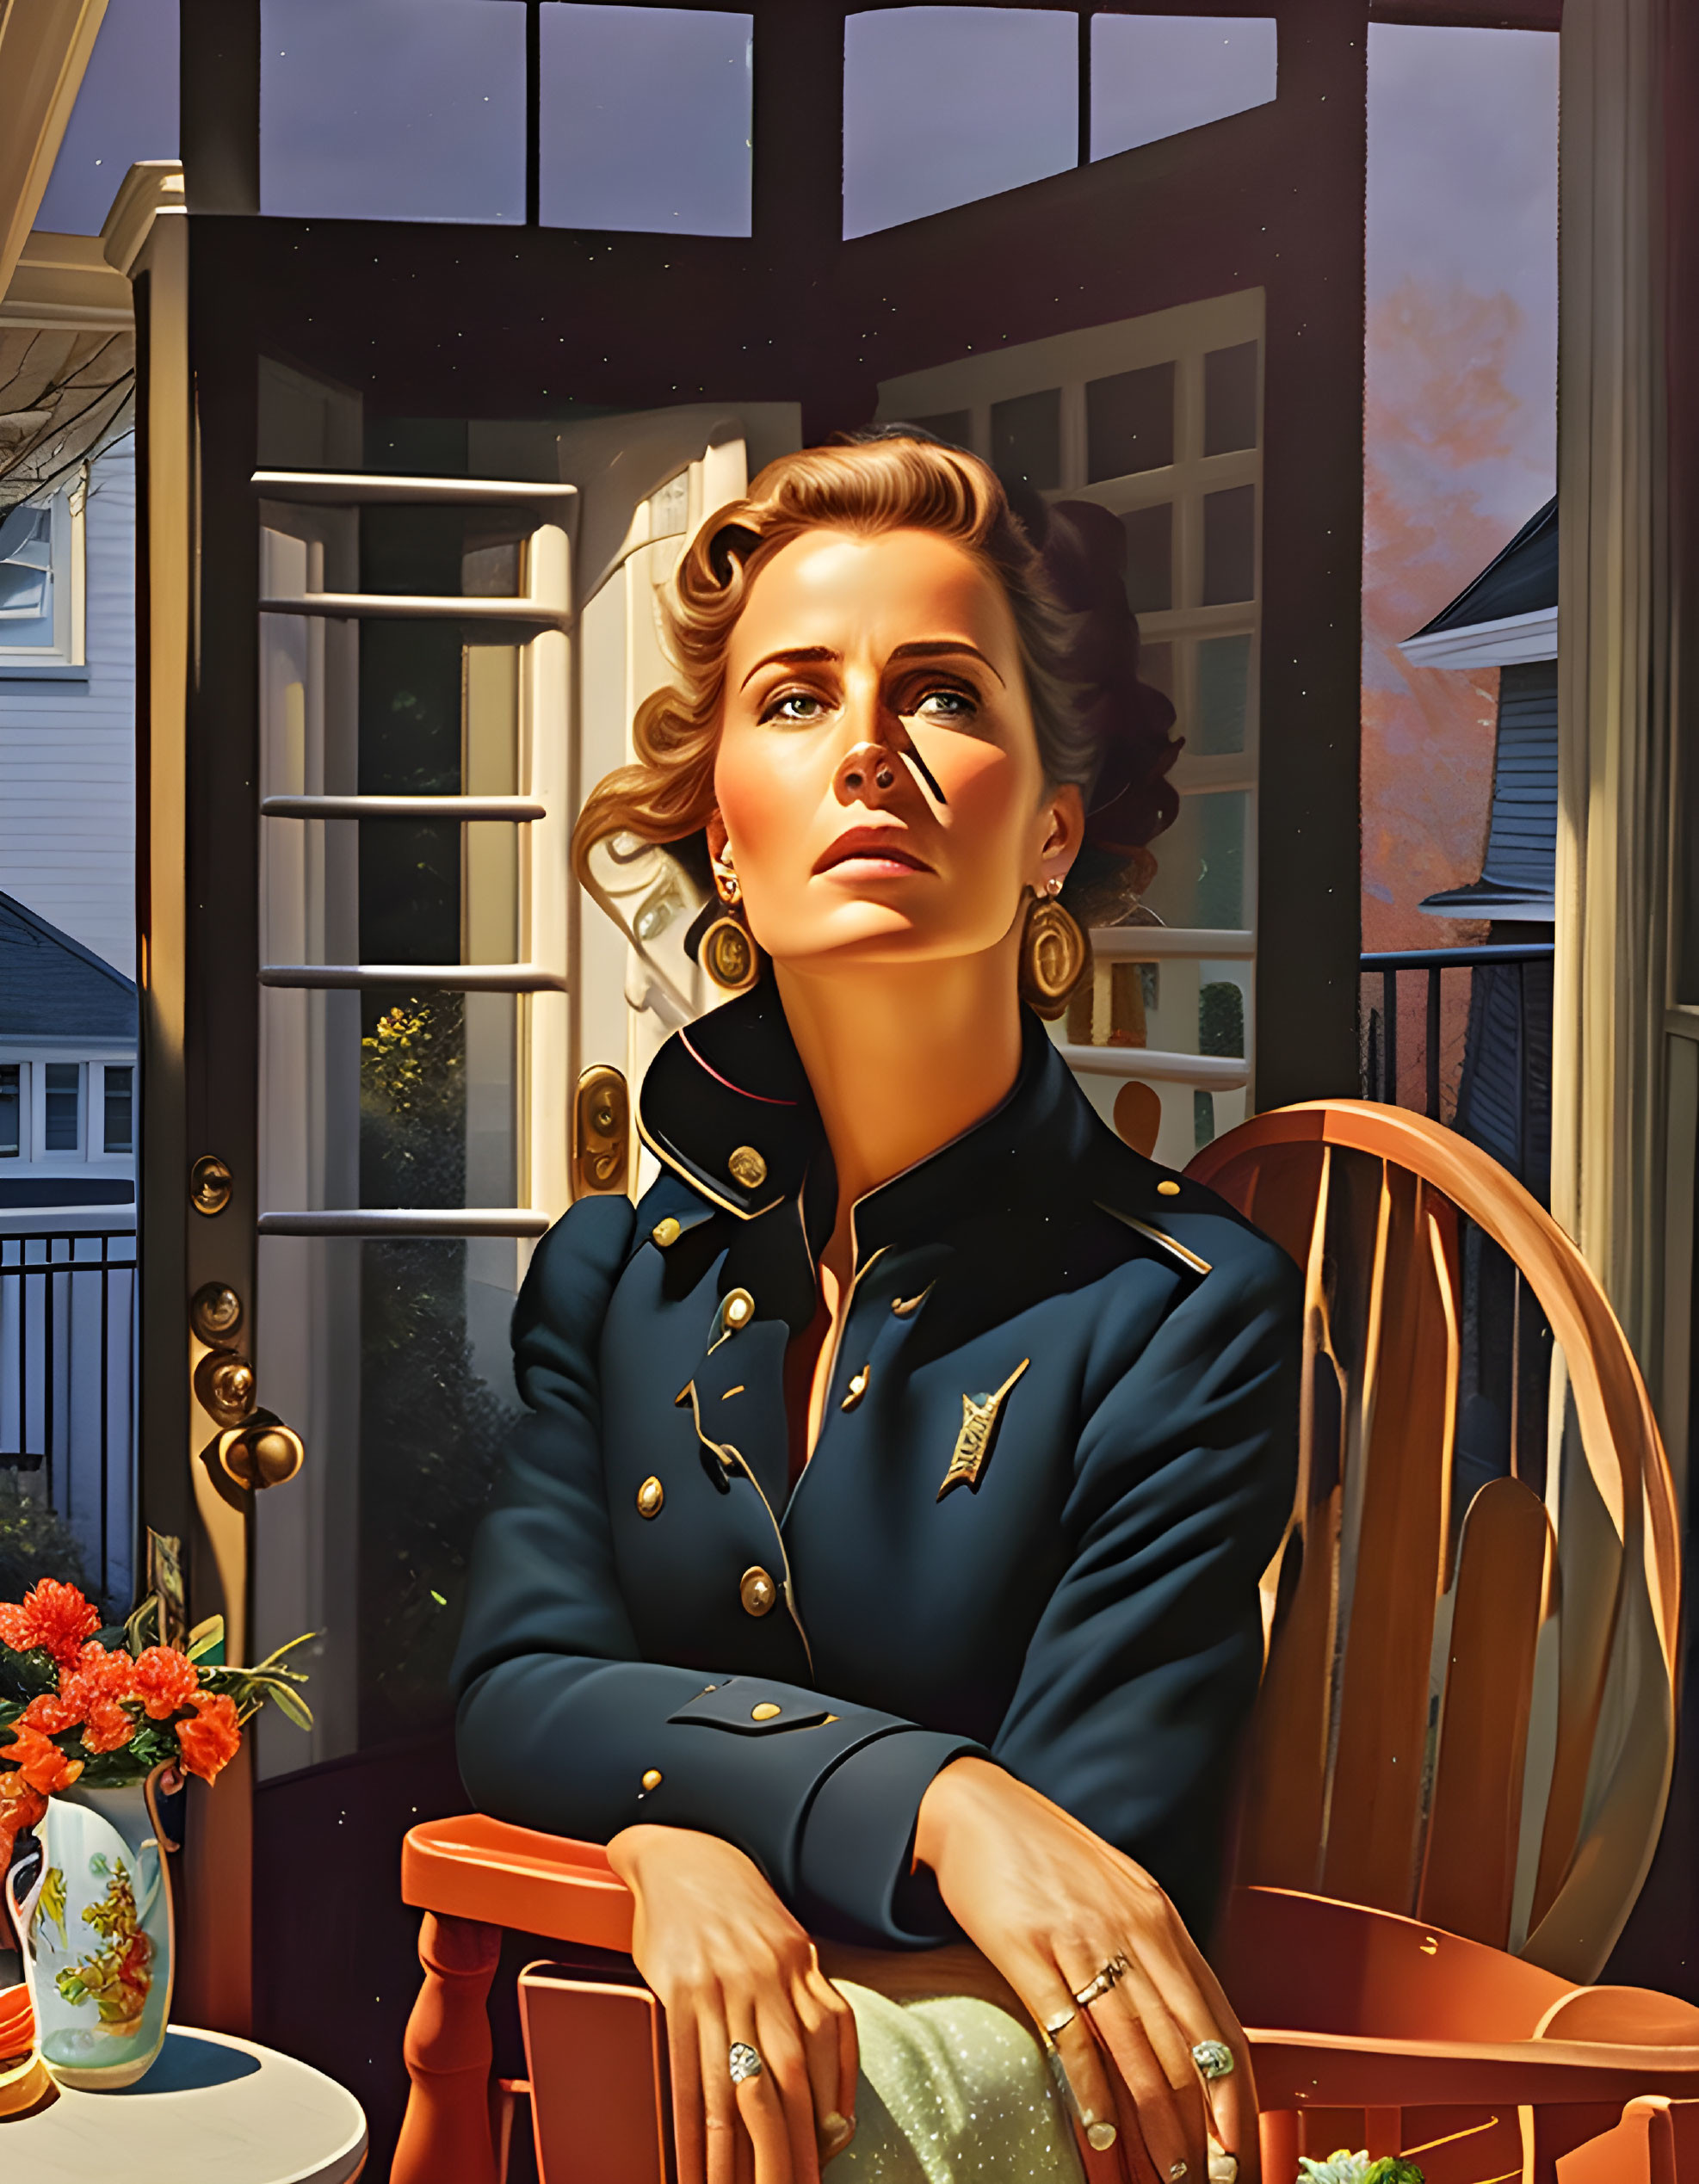 Vintage navy uniform woman sits pensively by door with suburban background.